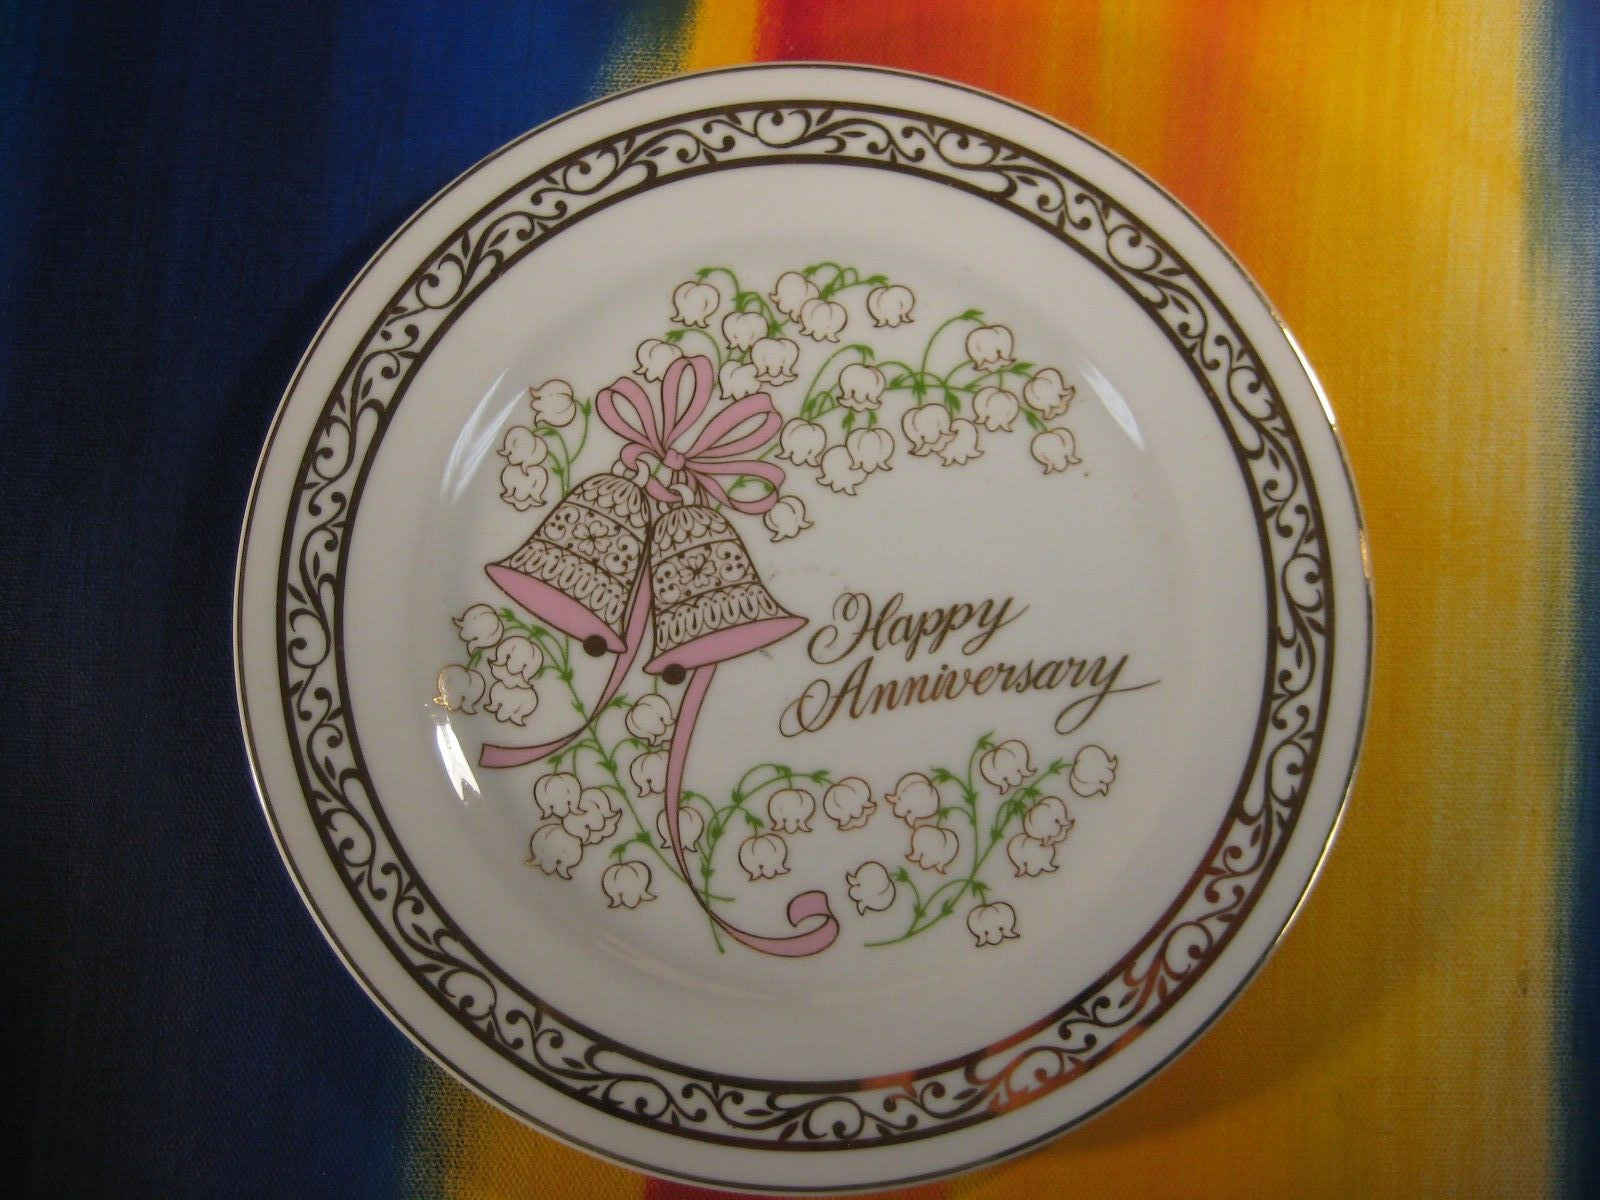 Happy Anniversary Floral 70s Wedding Bells Gift Plate by George Good